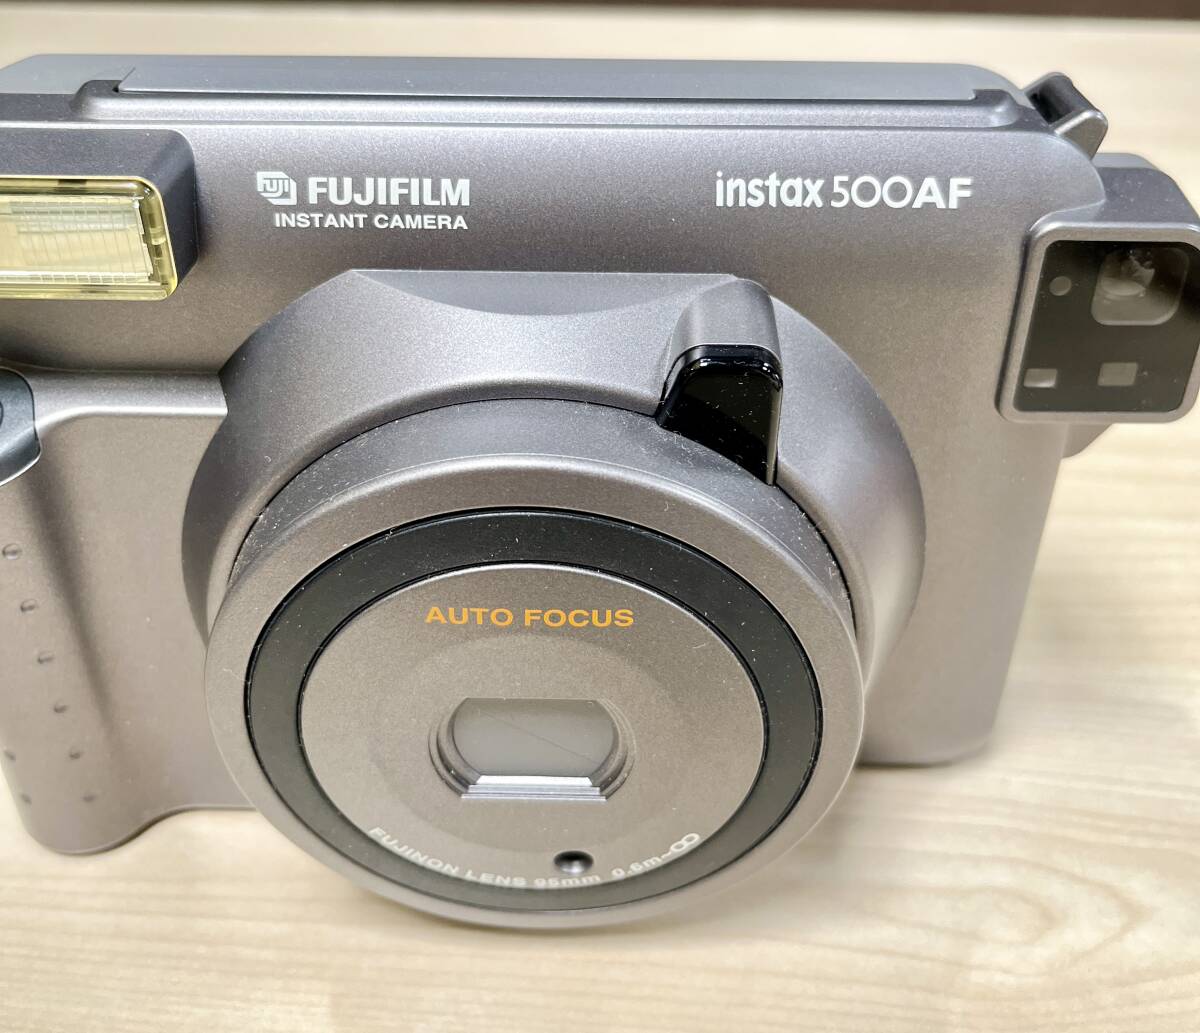 ..(HaY215) Fuji Film instant camera intax500AF width length wide electrification verification settled secondhand goods 60 size 